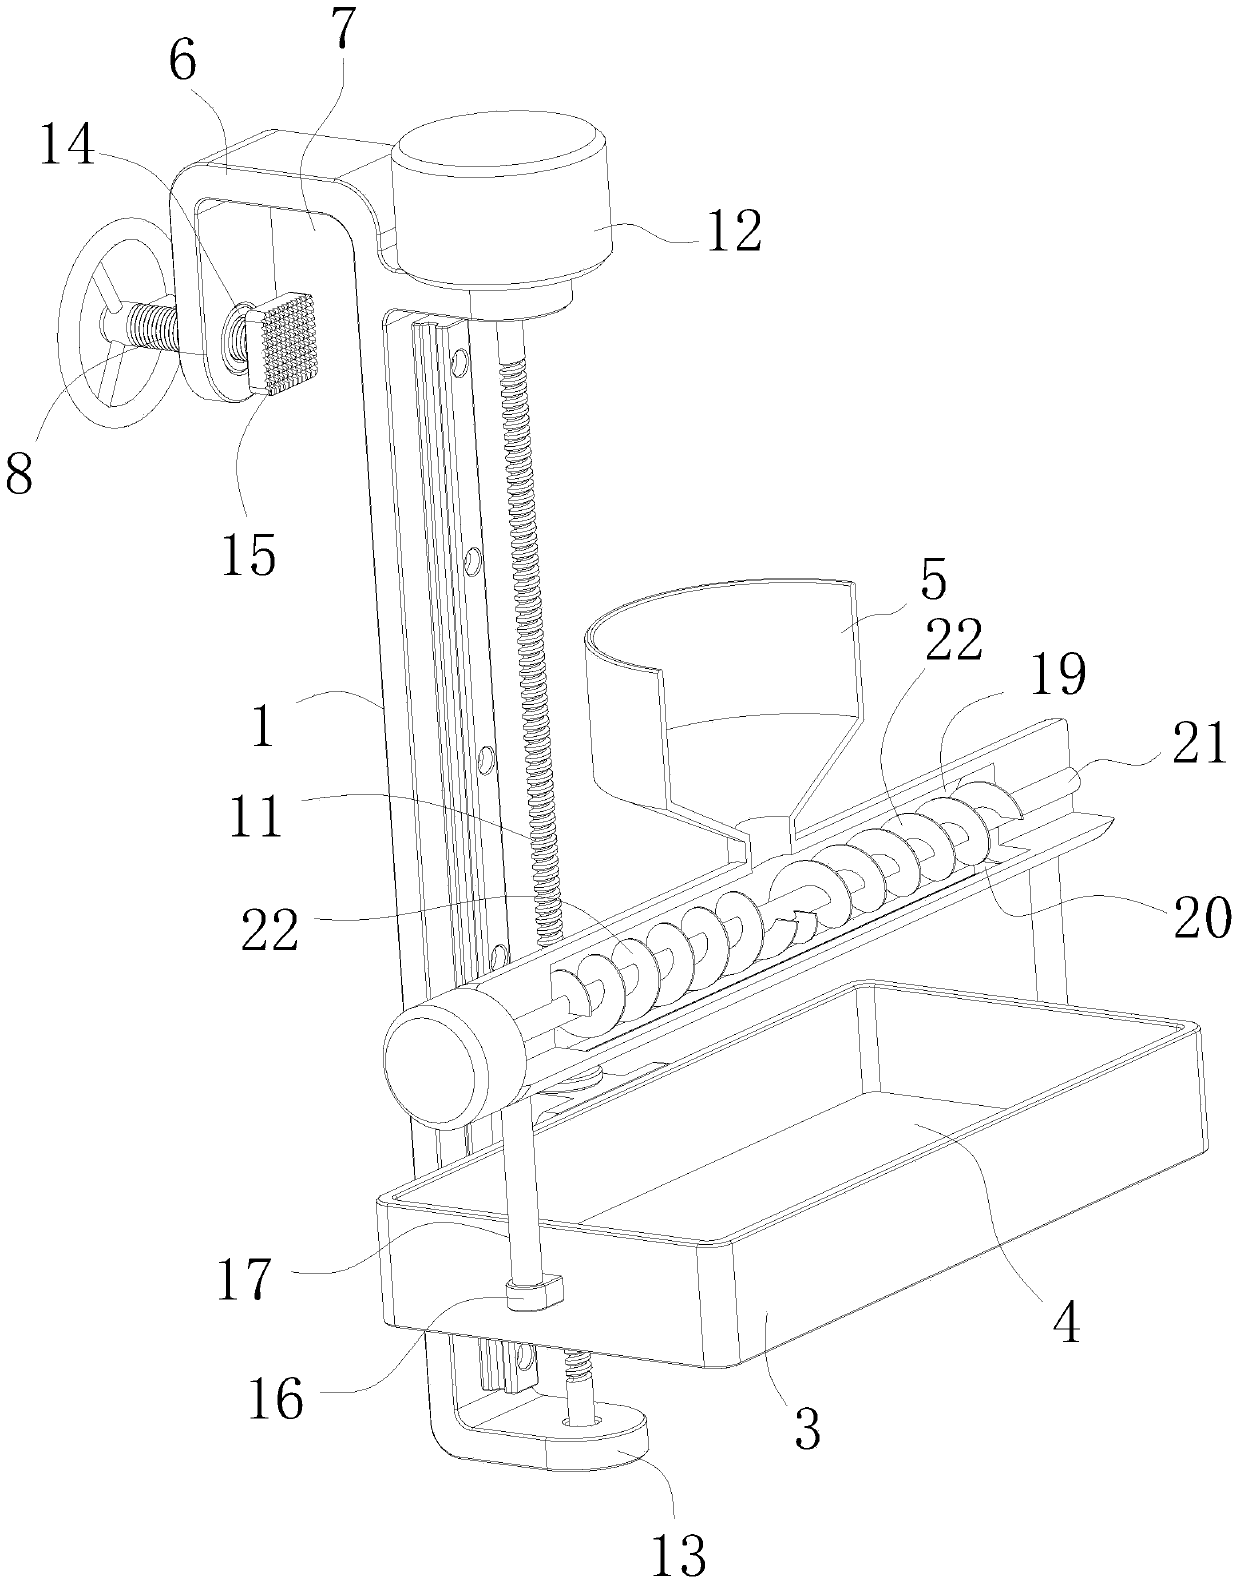 Pig feed putting device